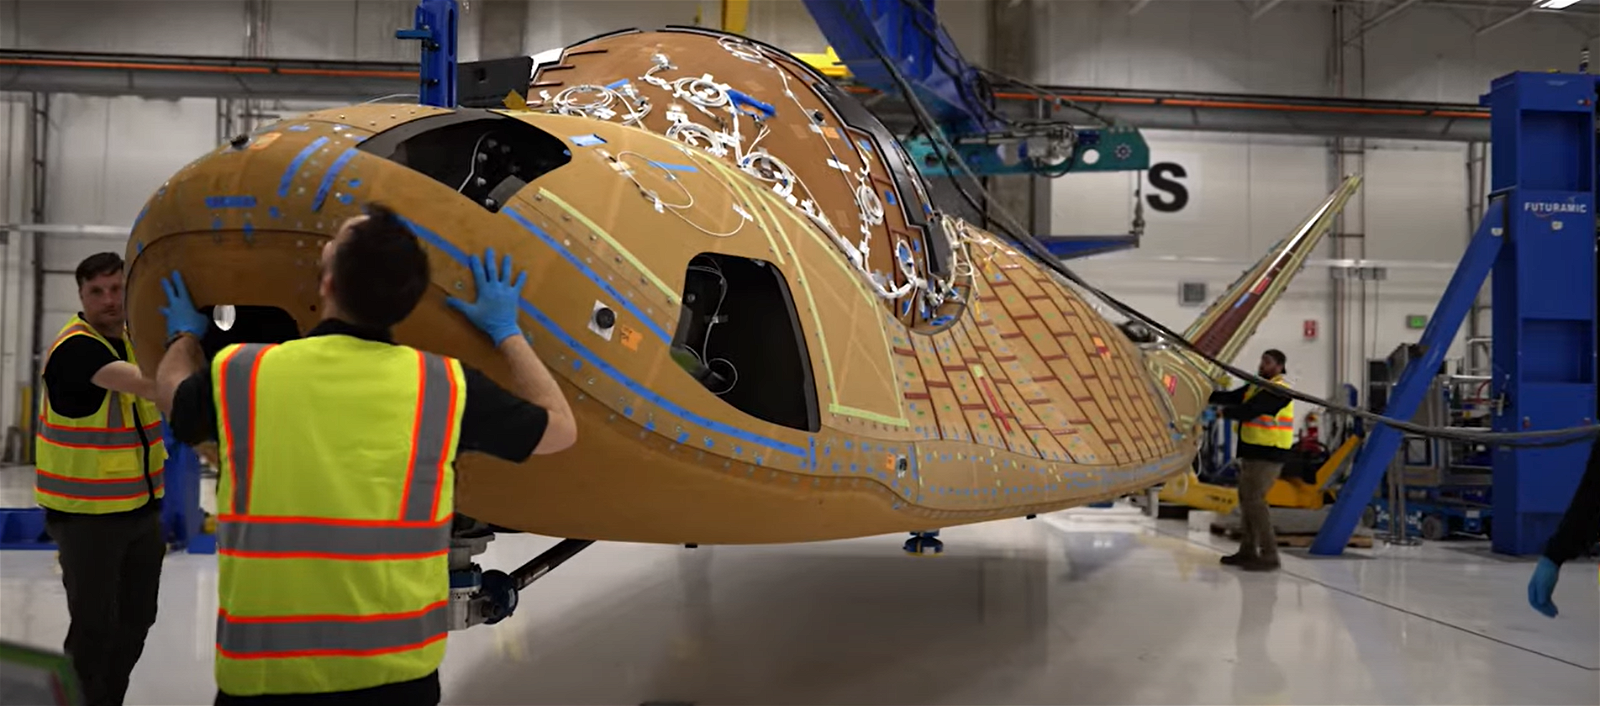 This spaceship can land like an airplane when it returns